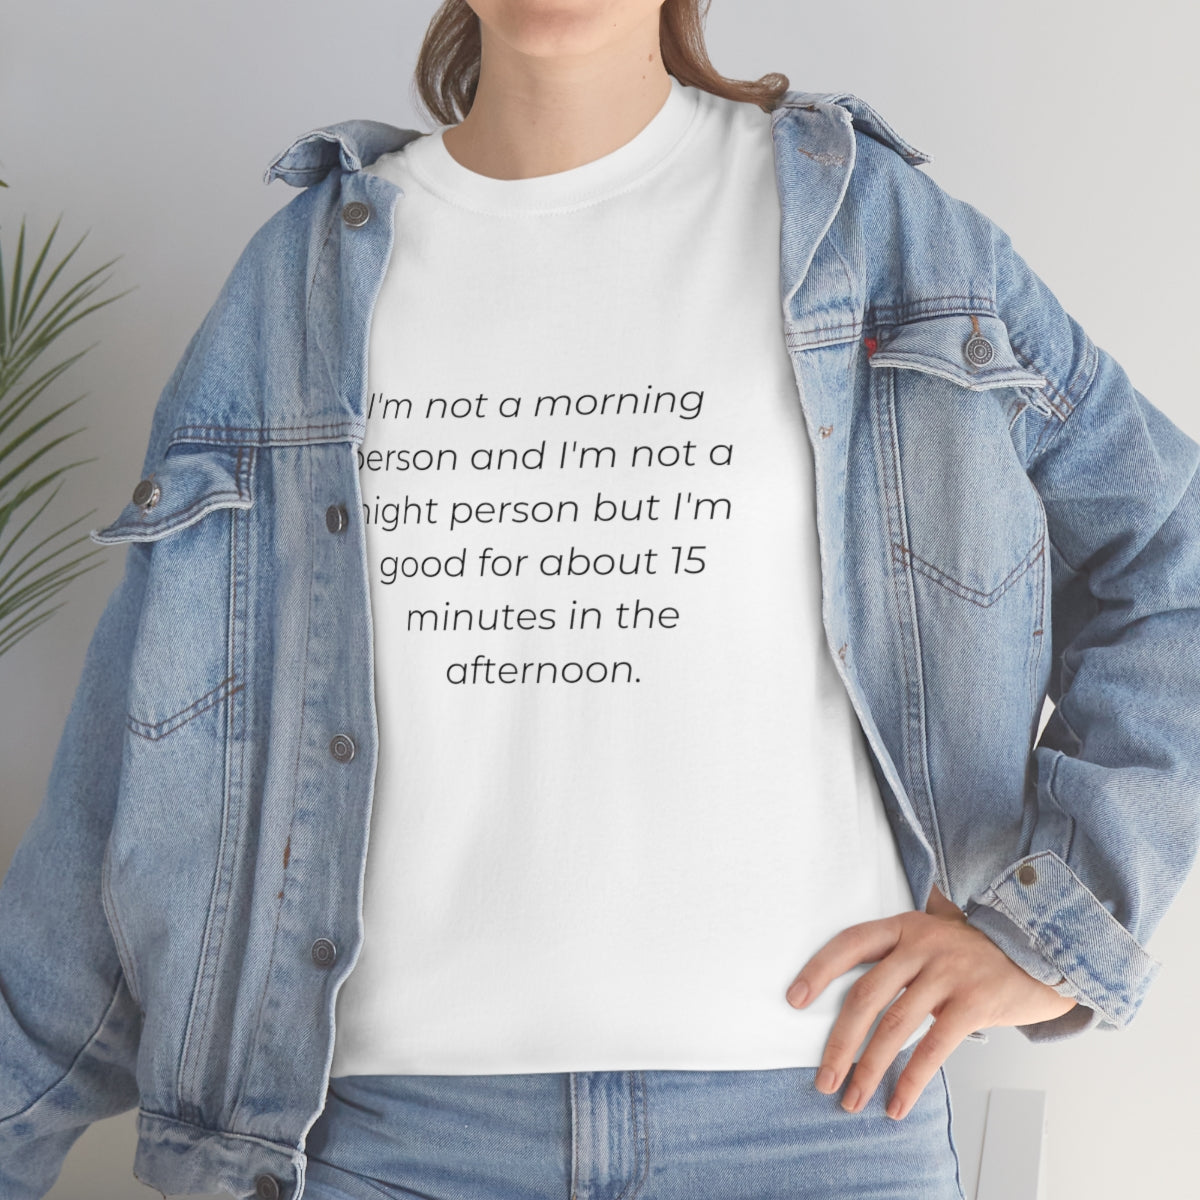 Morning Person, Not A Morning Person Tshirt, Funny T-Shirt,  Morning Motivation, Ew People, Good Morning Shirt, Mood Tee, Funny Quote Shirt - The Good Life Vibe